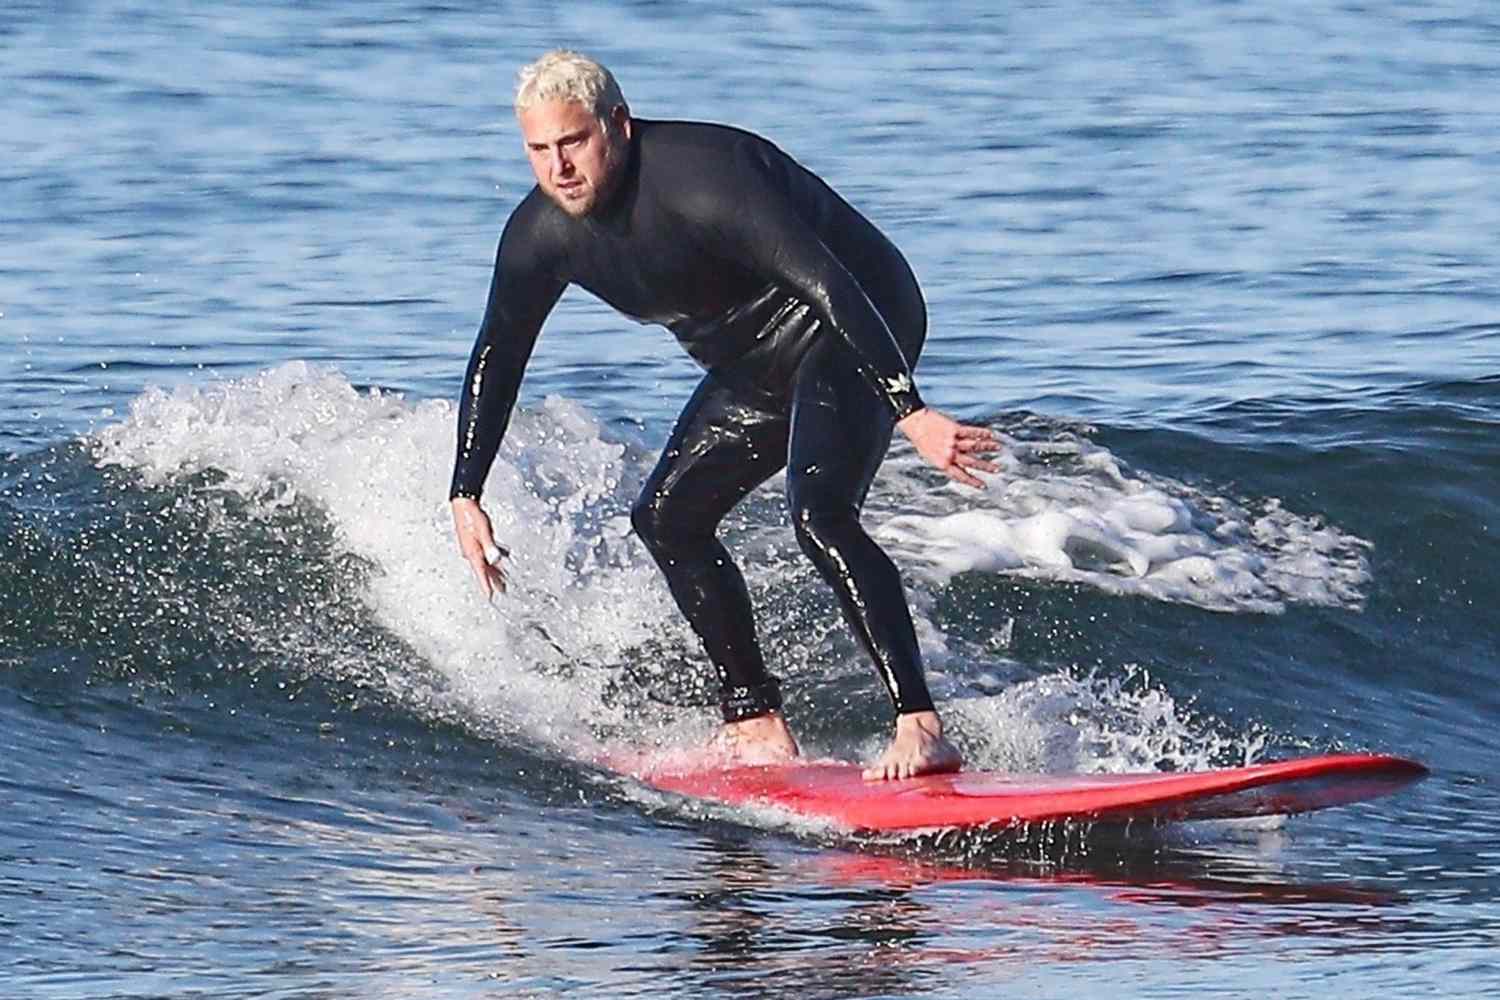 Jonah Hill shows off his tattoed surfer body after a surfing session on a windy California morning!